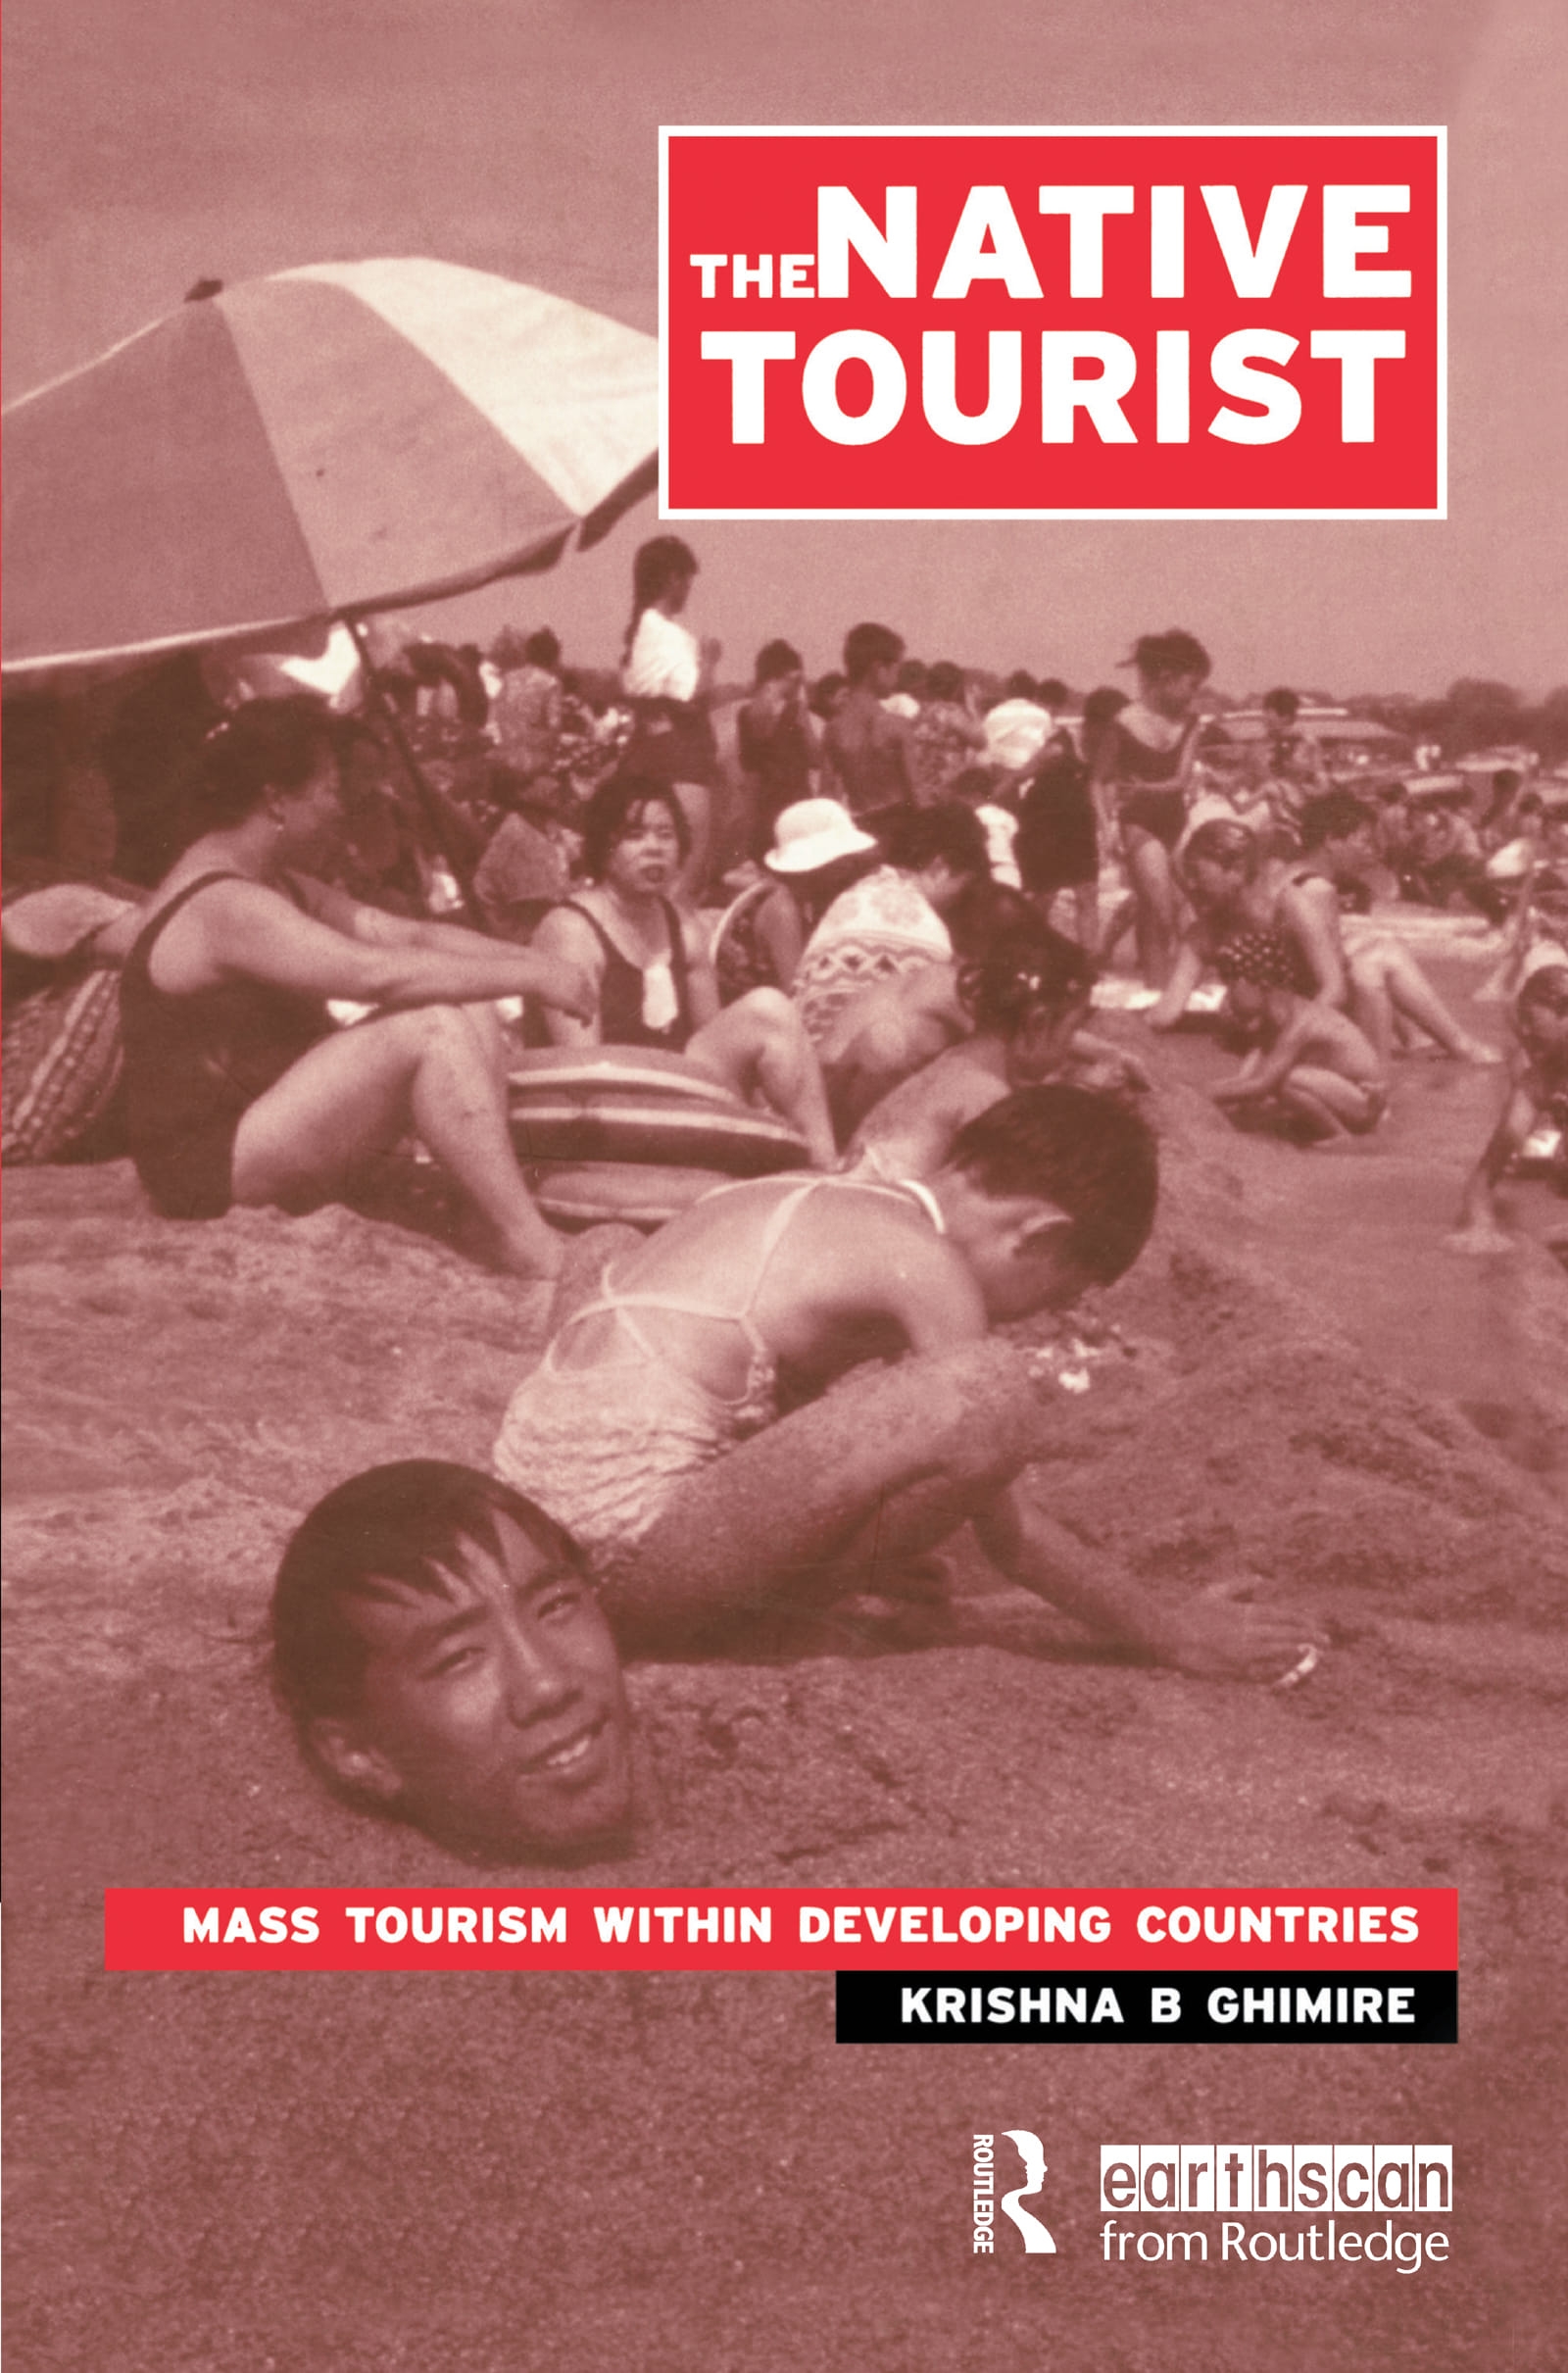 The Native Tourist: Mass Tourism Within Developing Countries